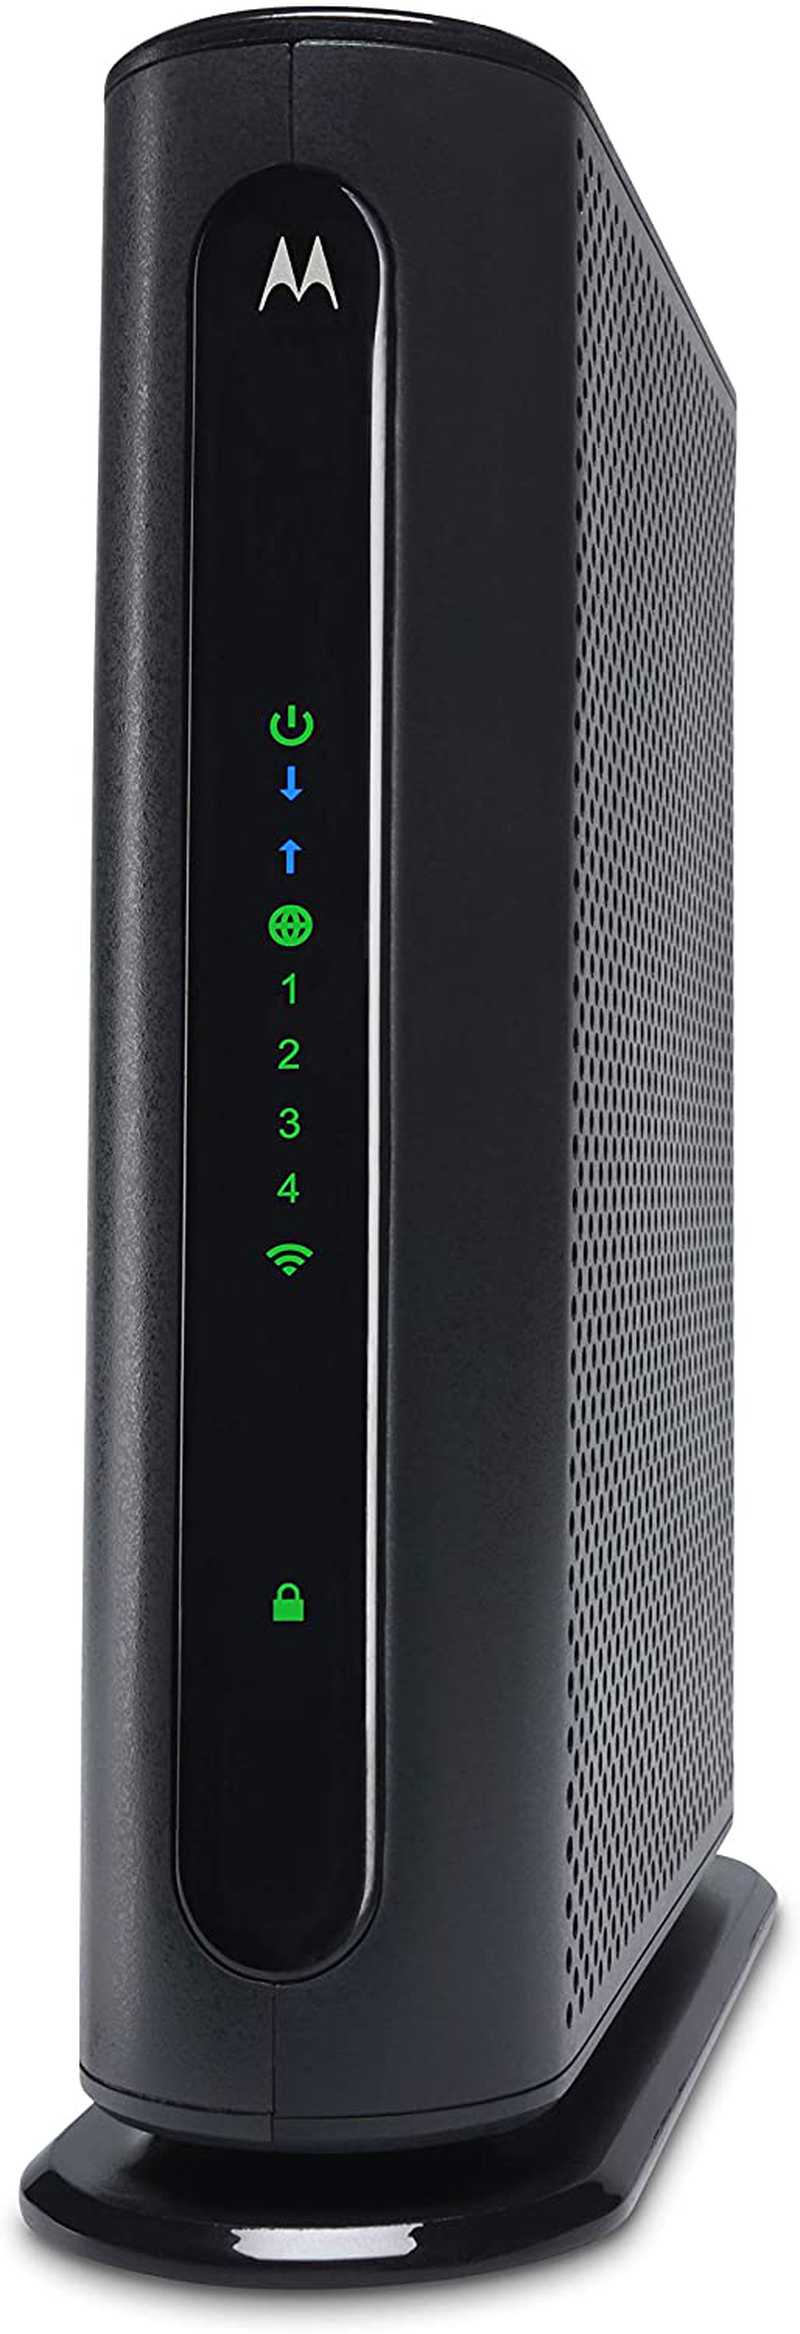 Motorola MG8702 | DOCSIS 3.1 Cable Modem + Wi-Fi Router (High Speed Combo) with Intelligent Power Boost | AC3200 Wi-Fi Speed | Approved for Comcast Xfinity, Cox, and Charter Spectrum